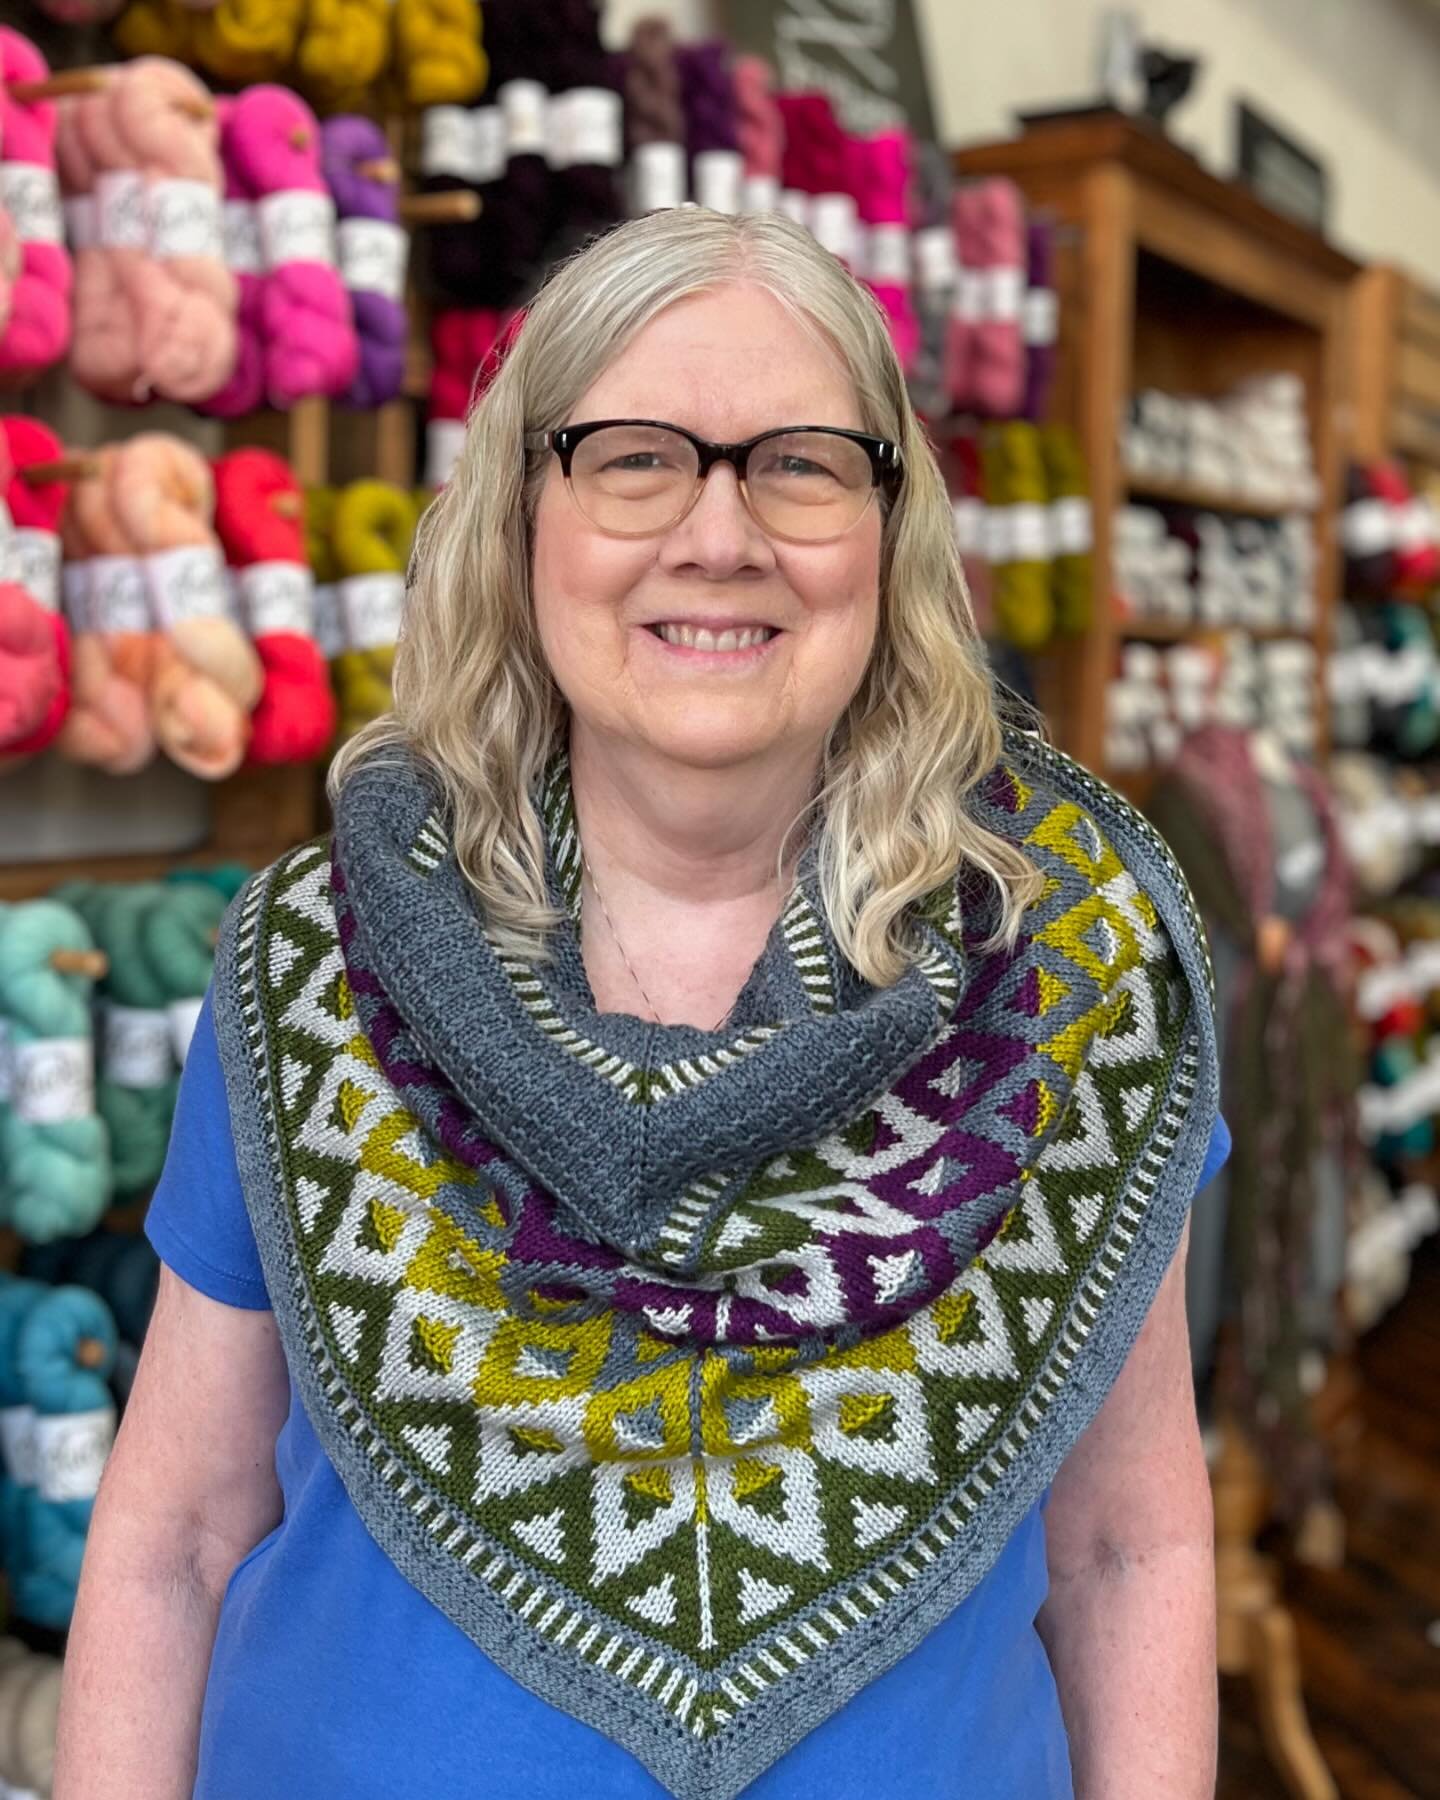 Vicki blocked her #artusshawl and it&rsquo;s just completely stunning knit up in @pluckyknitter Luxe Merino Light Sport! 👀🥰Her colors look great on her!

Thanks for providing so much inspiration for our #mkartuskal, @vaburk!

There&rsquo;s still a 